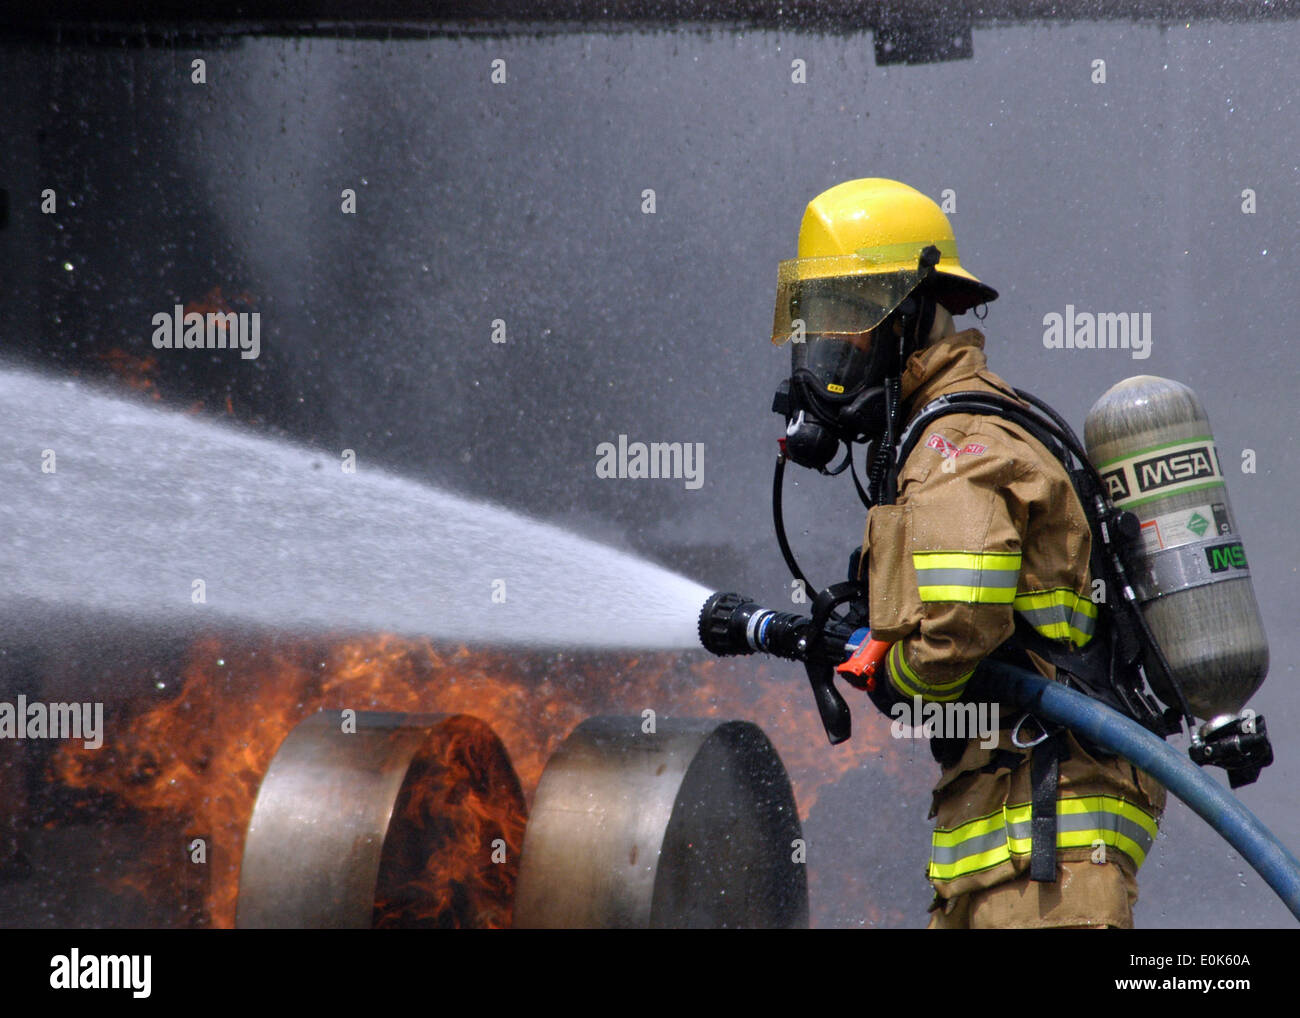 080730-N-5277R-003 ATSUGI, Japan (July 30, 2008) A Commander, Naval Forces Japan firefighter douses a fire on a dummy aircraft Stock Photo